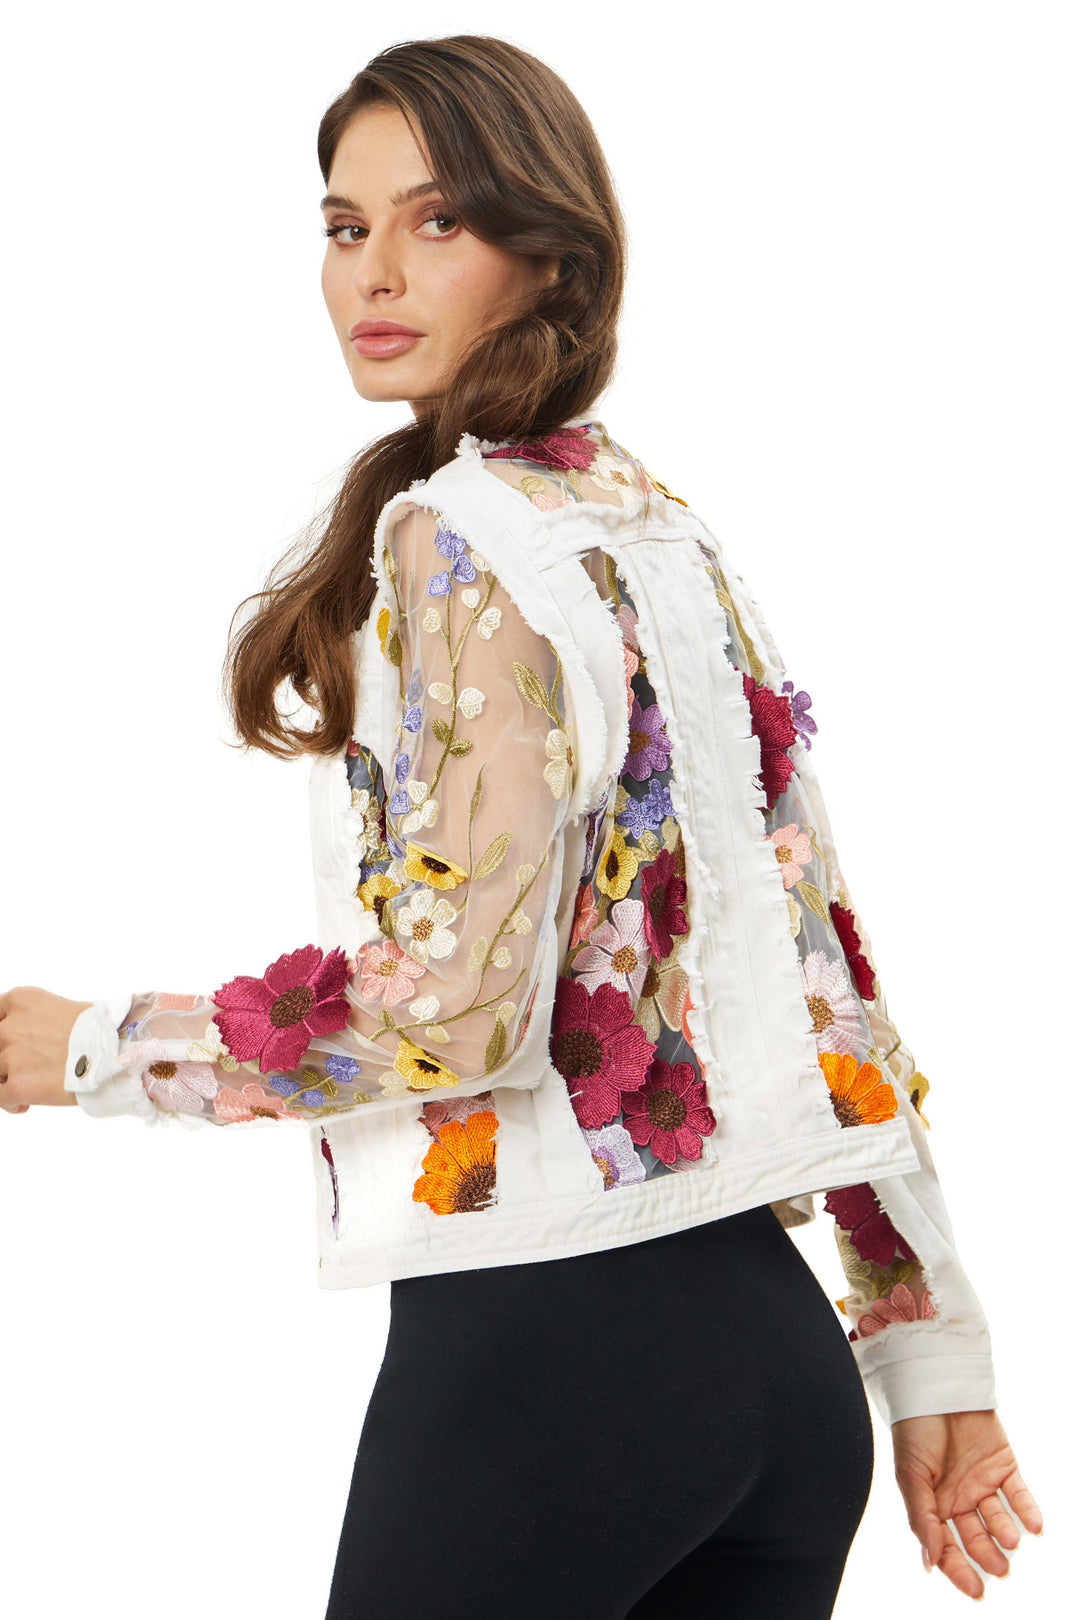 White Denim Jacket with Floral Embroidery: L